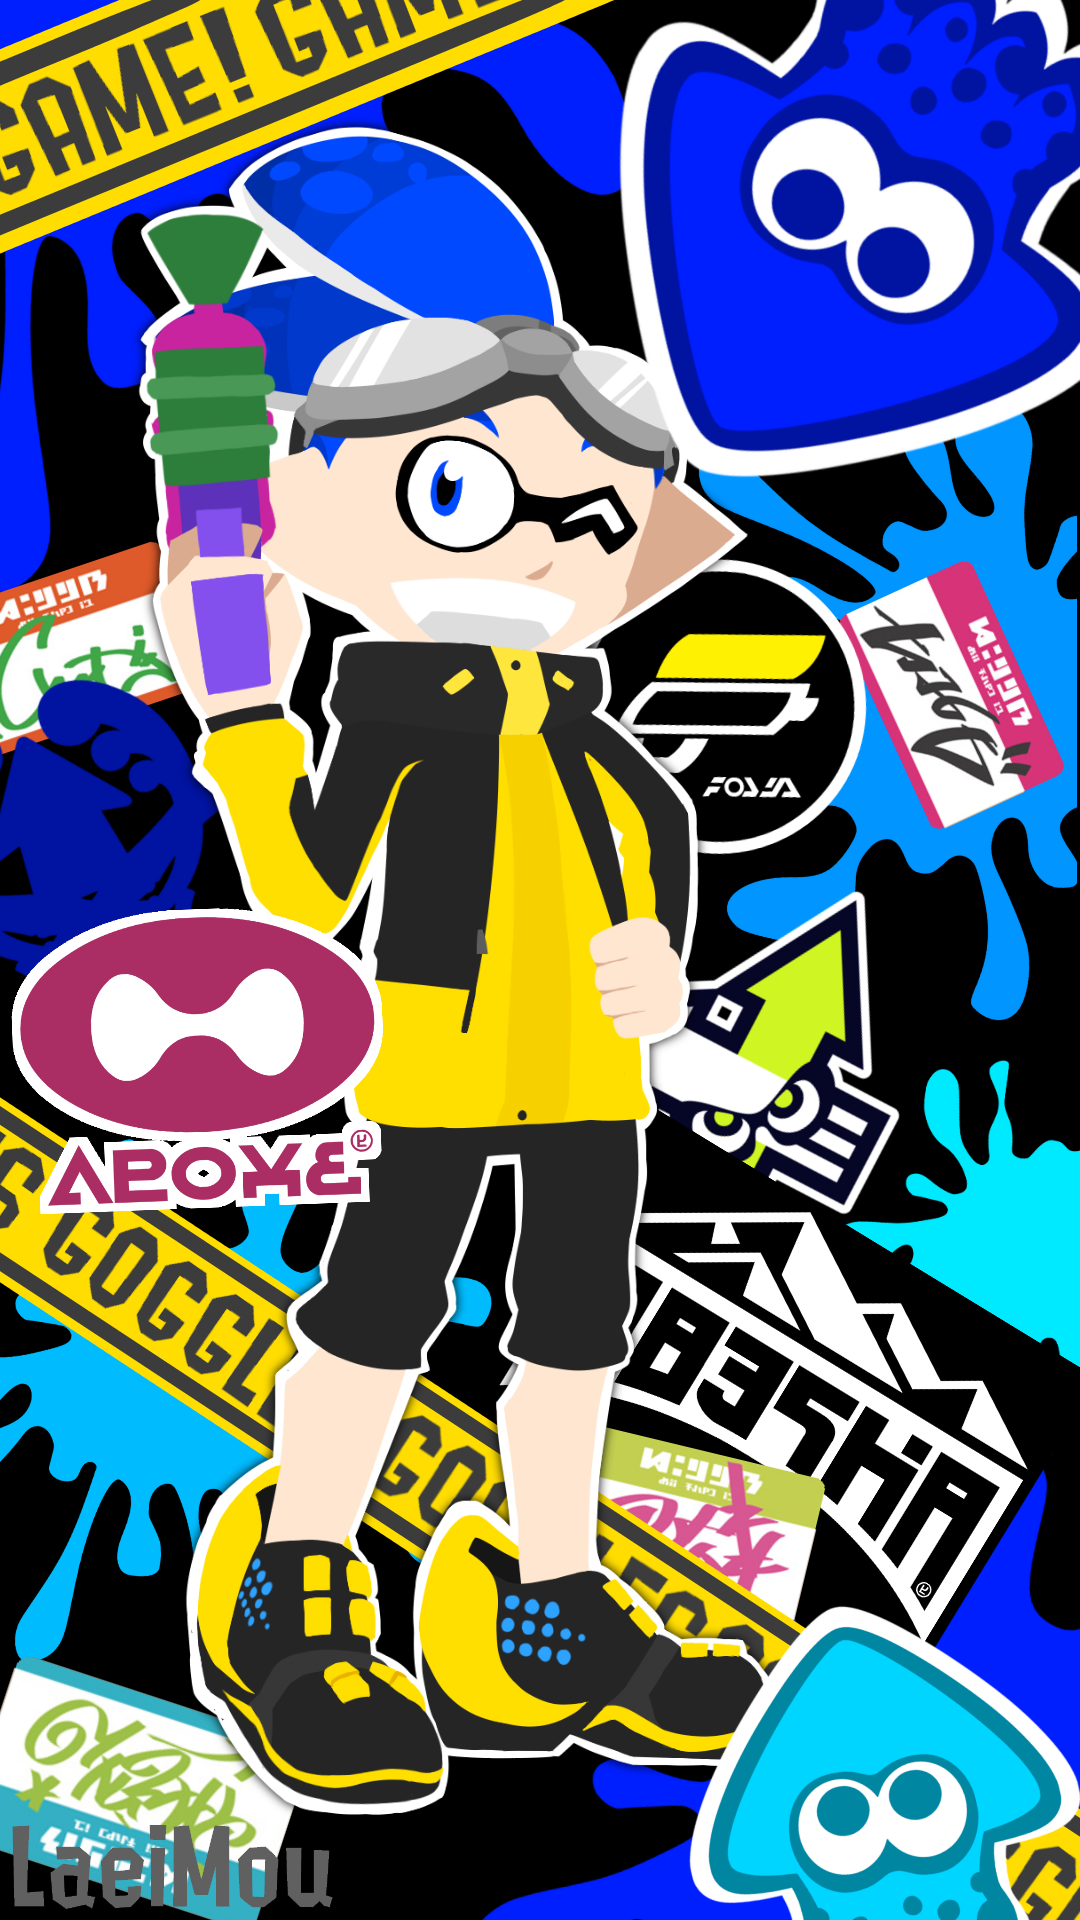 Tried making something based on the wallpaper rewards you get from the SplatNet app